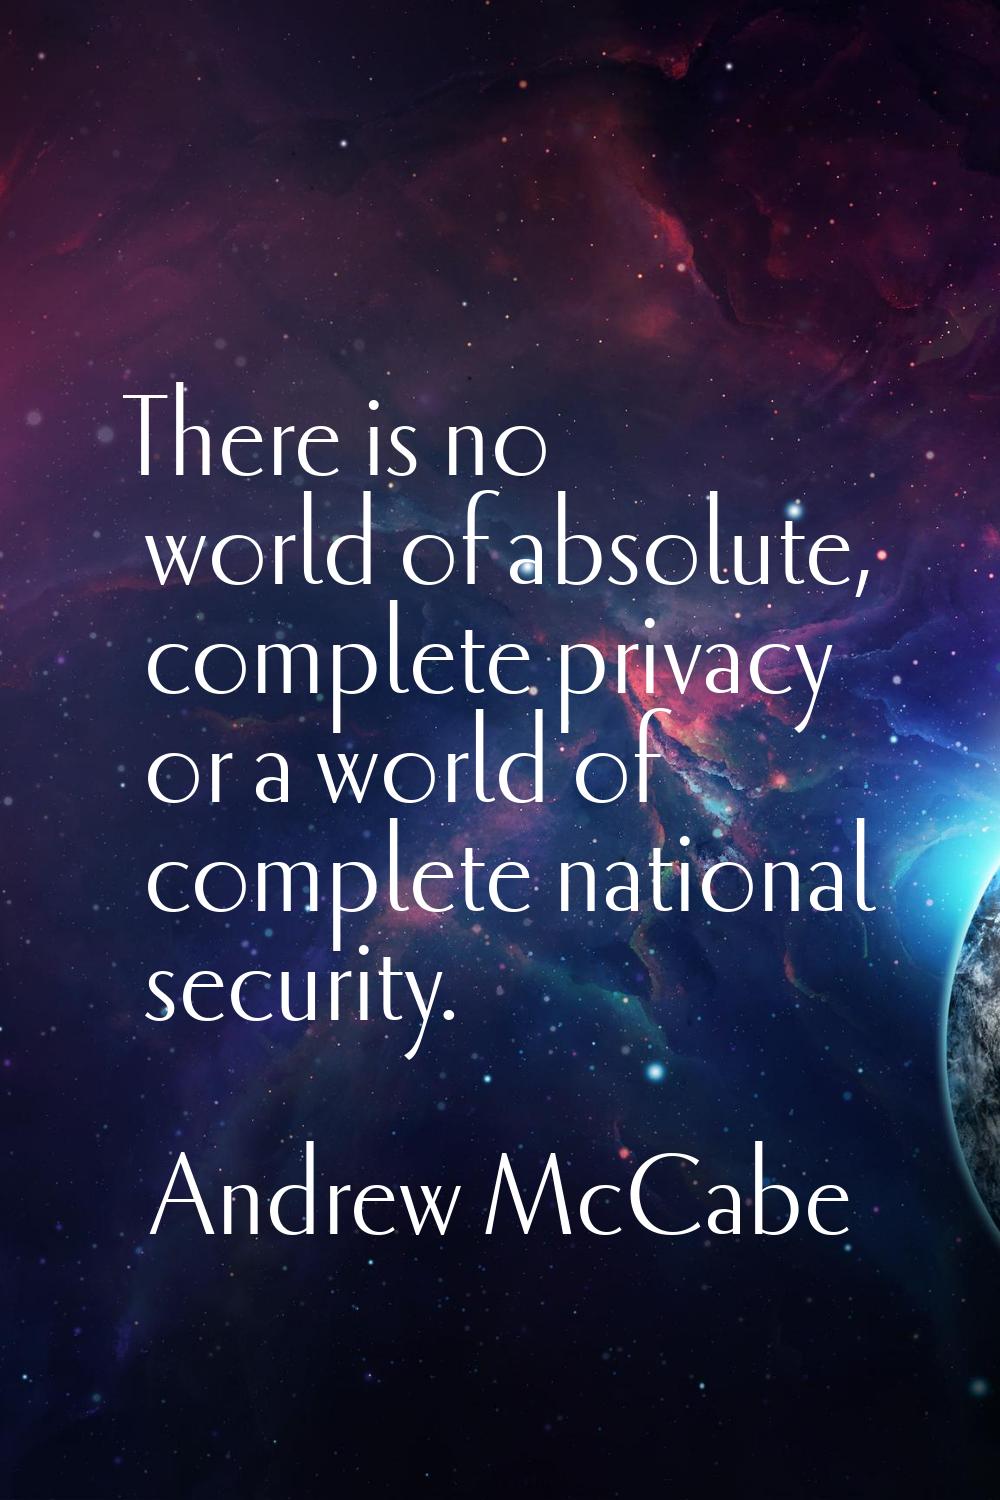 There is no world of absolute, complete privacy or a world of complete national security.